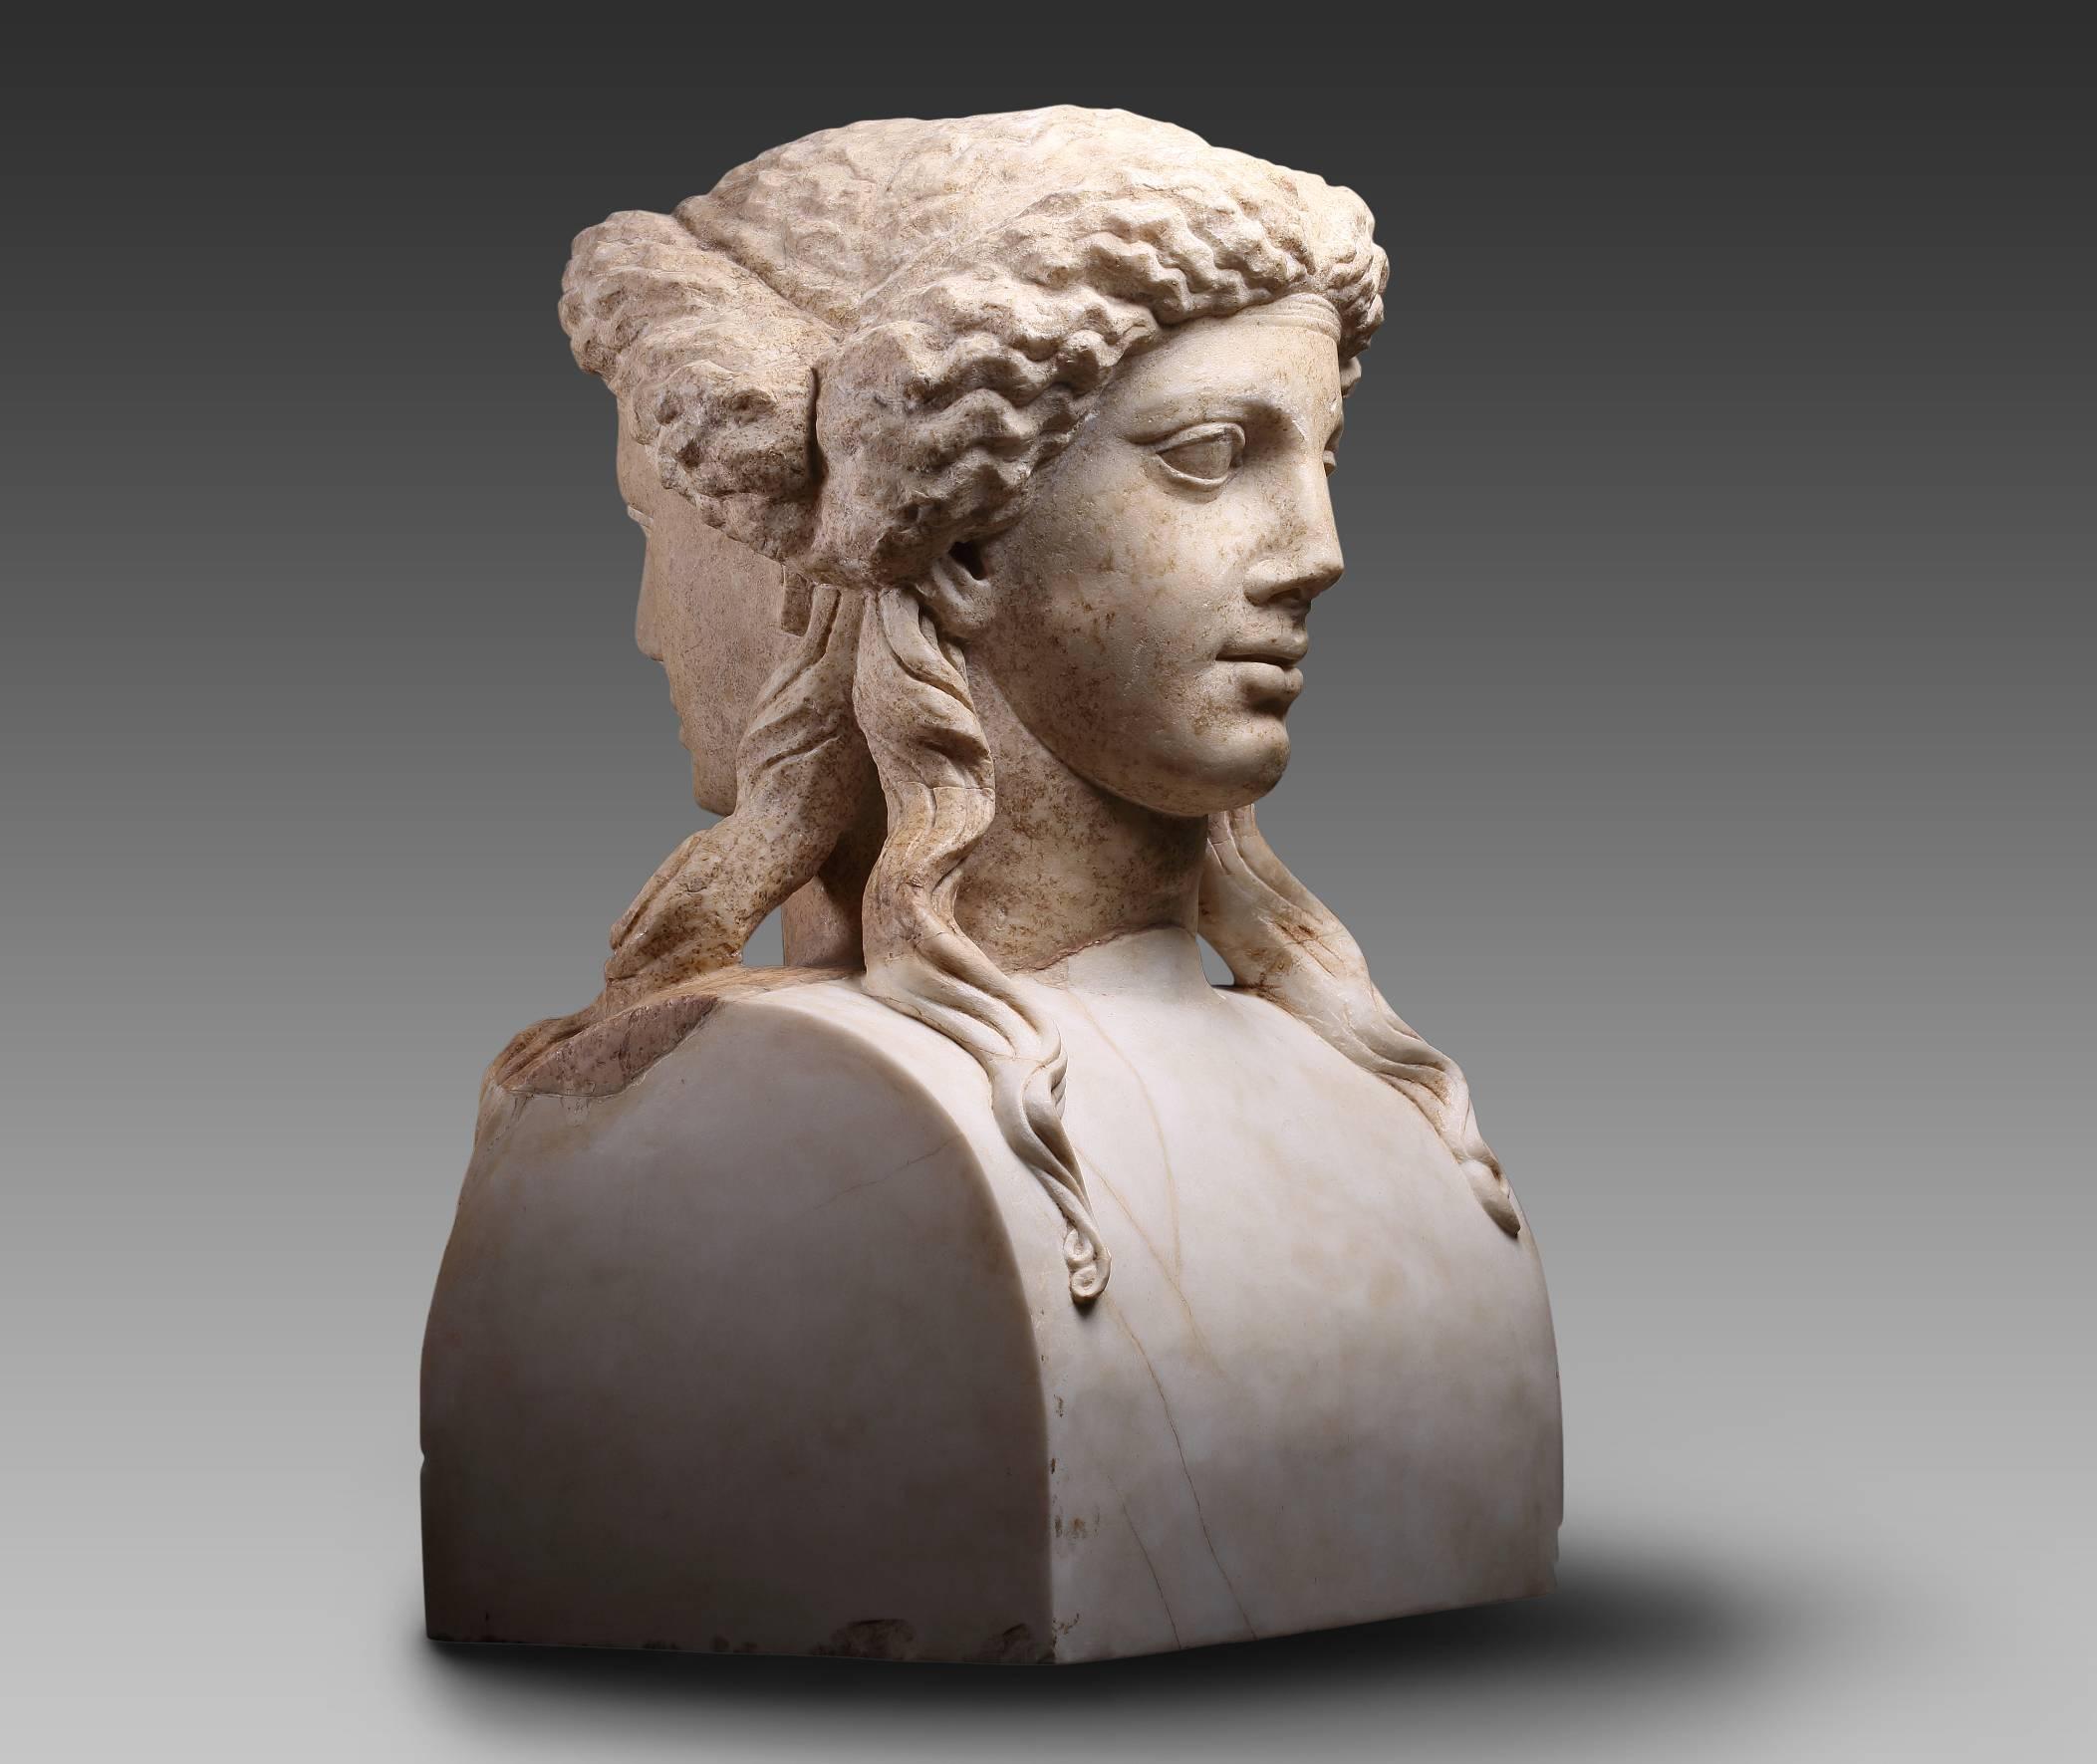 Roman Marble Janiform Herm Representing Dionysus-Bacchus, 2nd Century AD For Sale 2